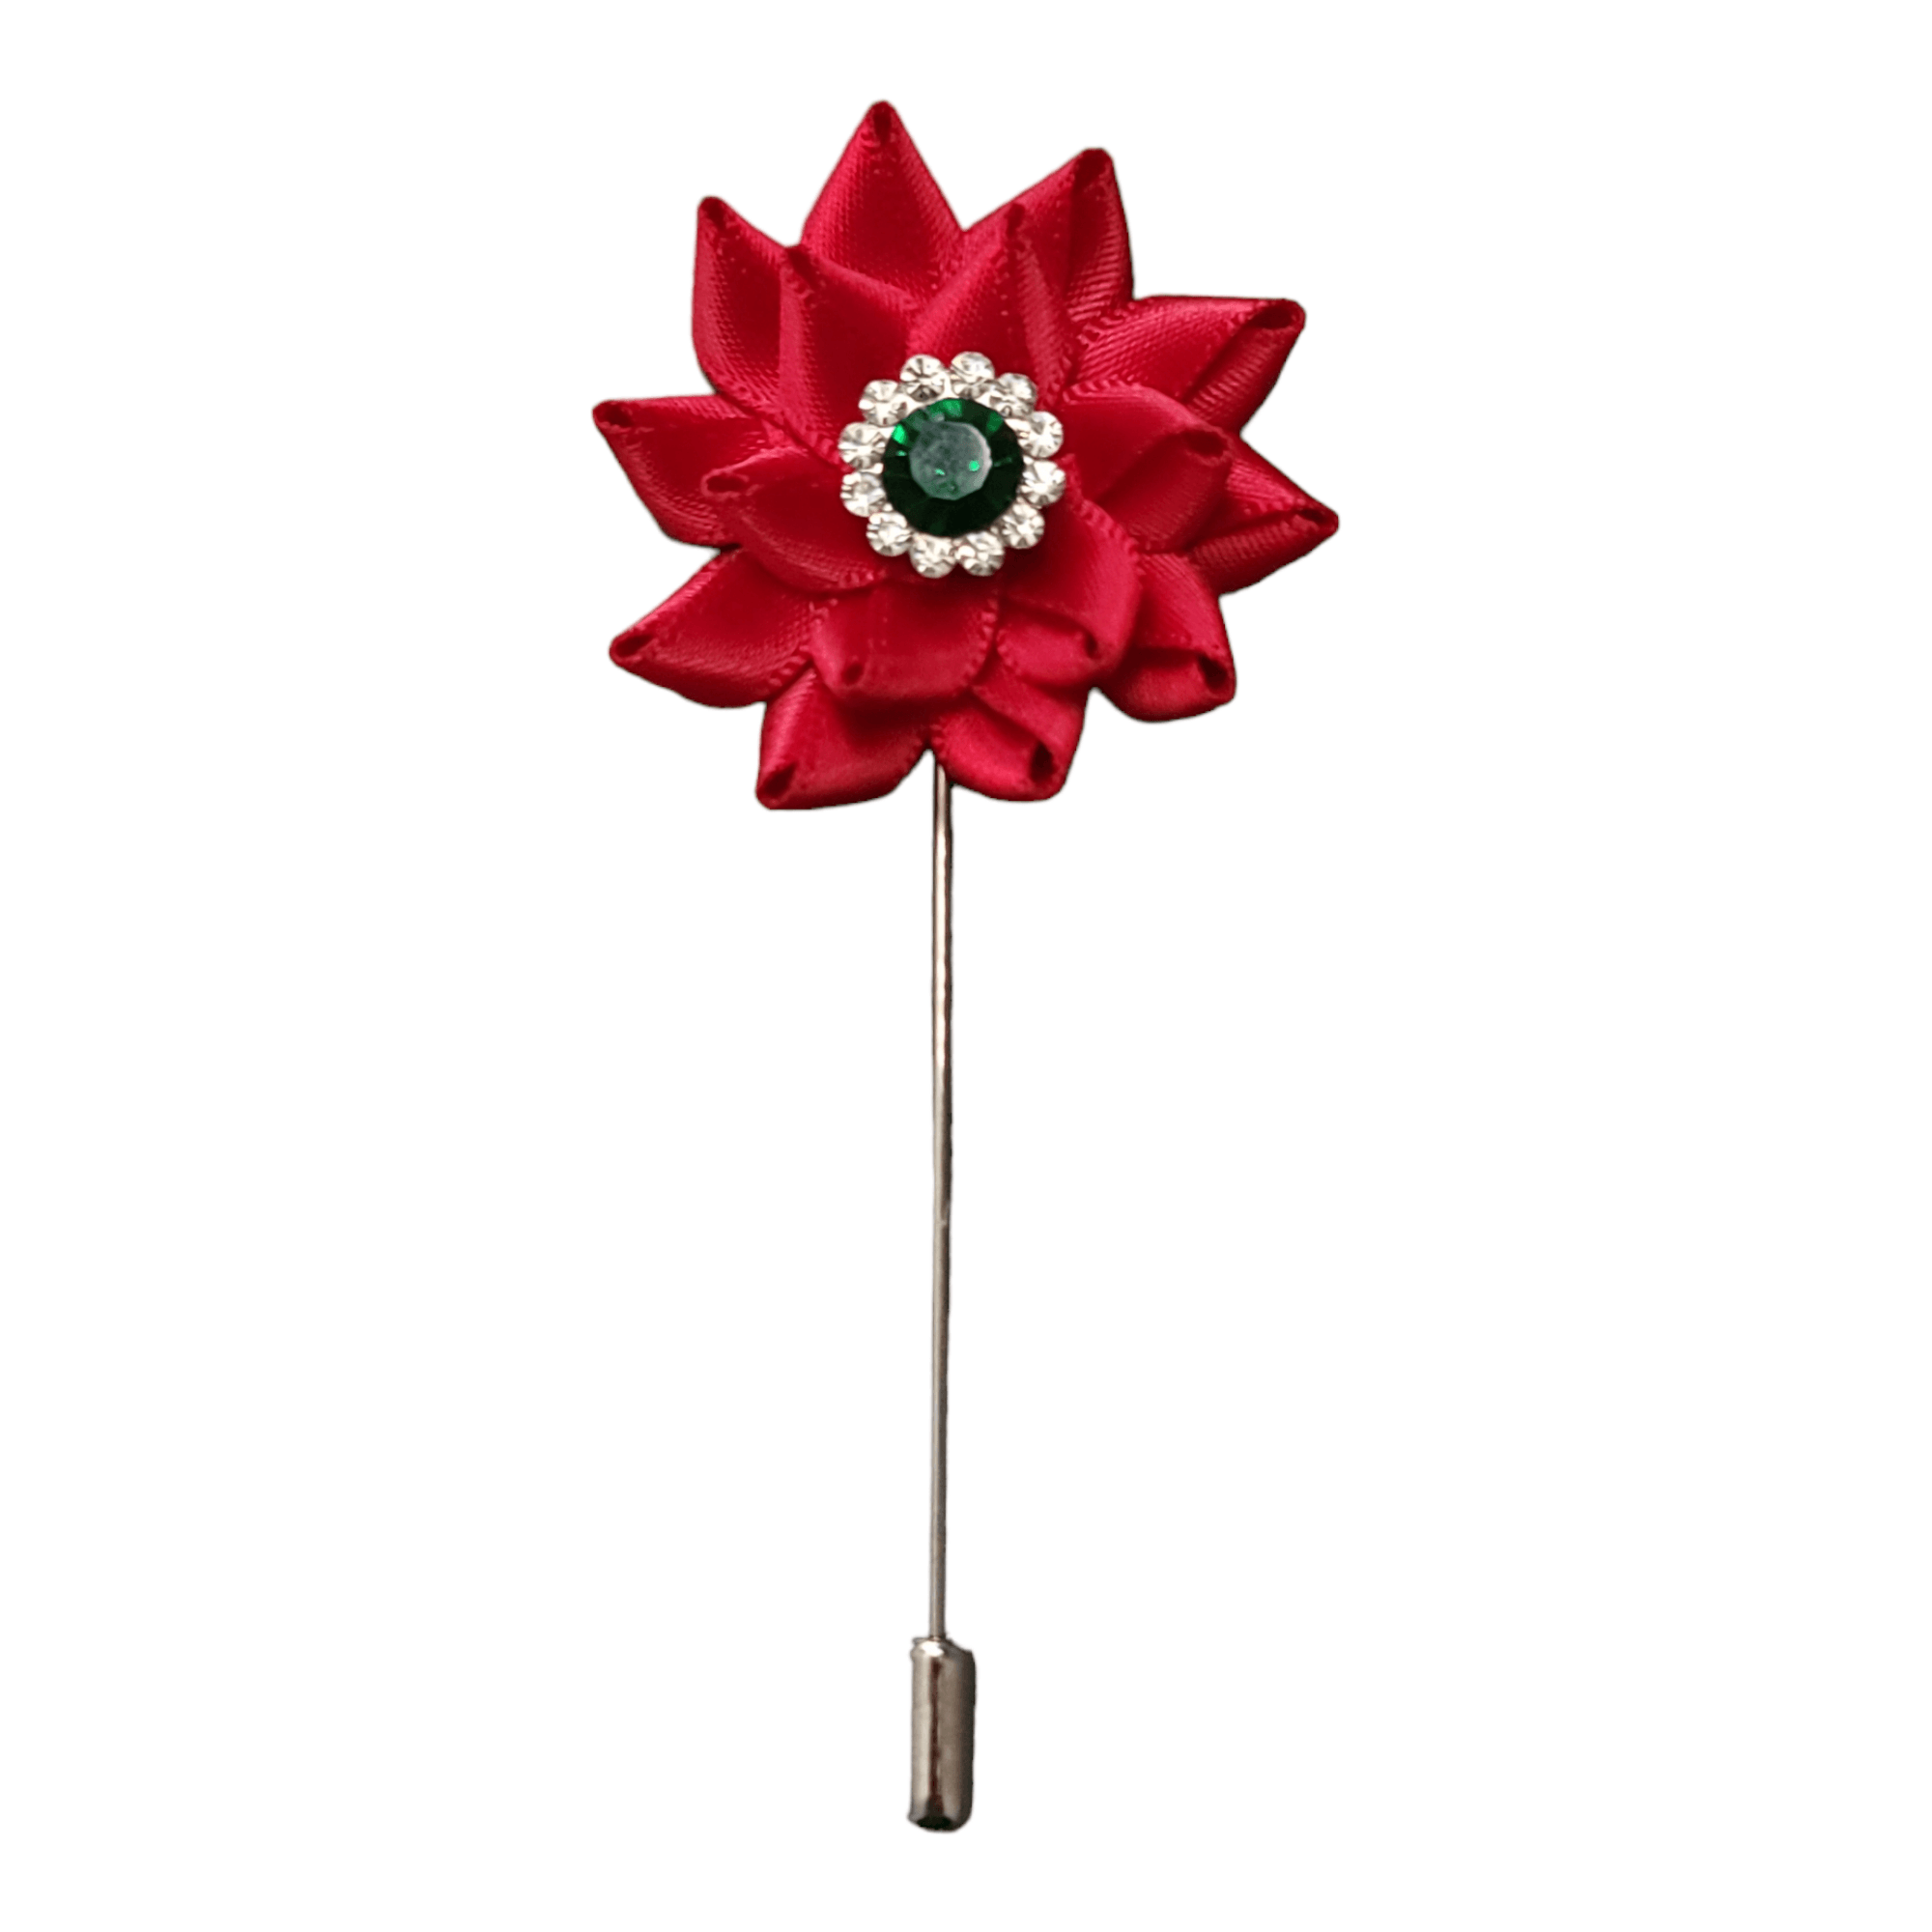 Flower Luxurious Lapel Pin Cherry Red - STYLETIE